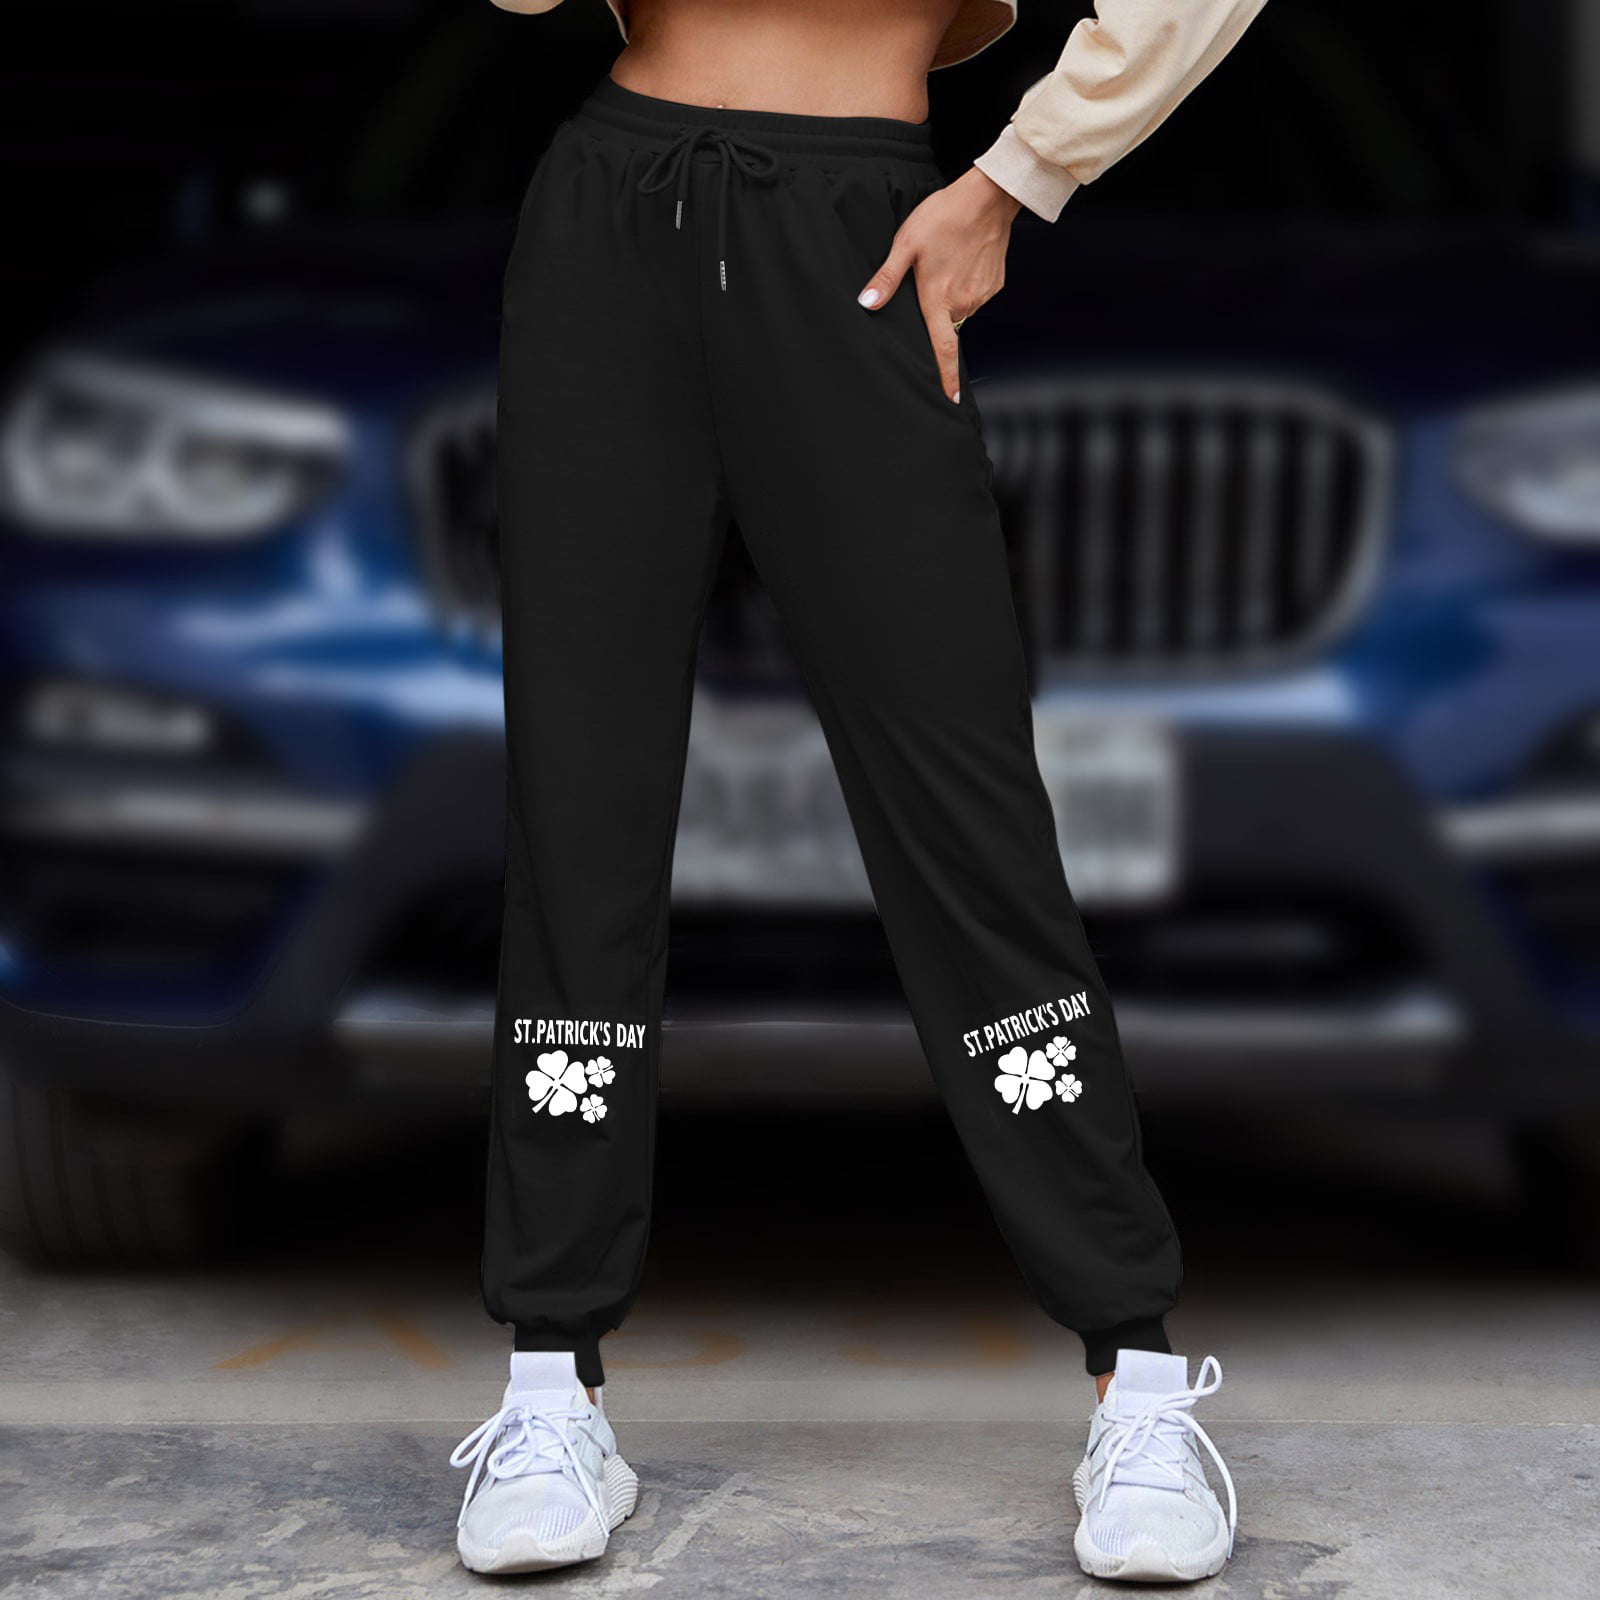 Aayomet Womens Work Pants Women's Sweatpants 3D Mesh Breathable Lightweight  Elastic Waist Casual Gym Track Pants with Zipper Pockets,Black S